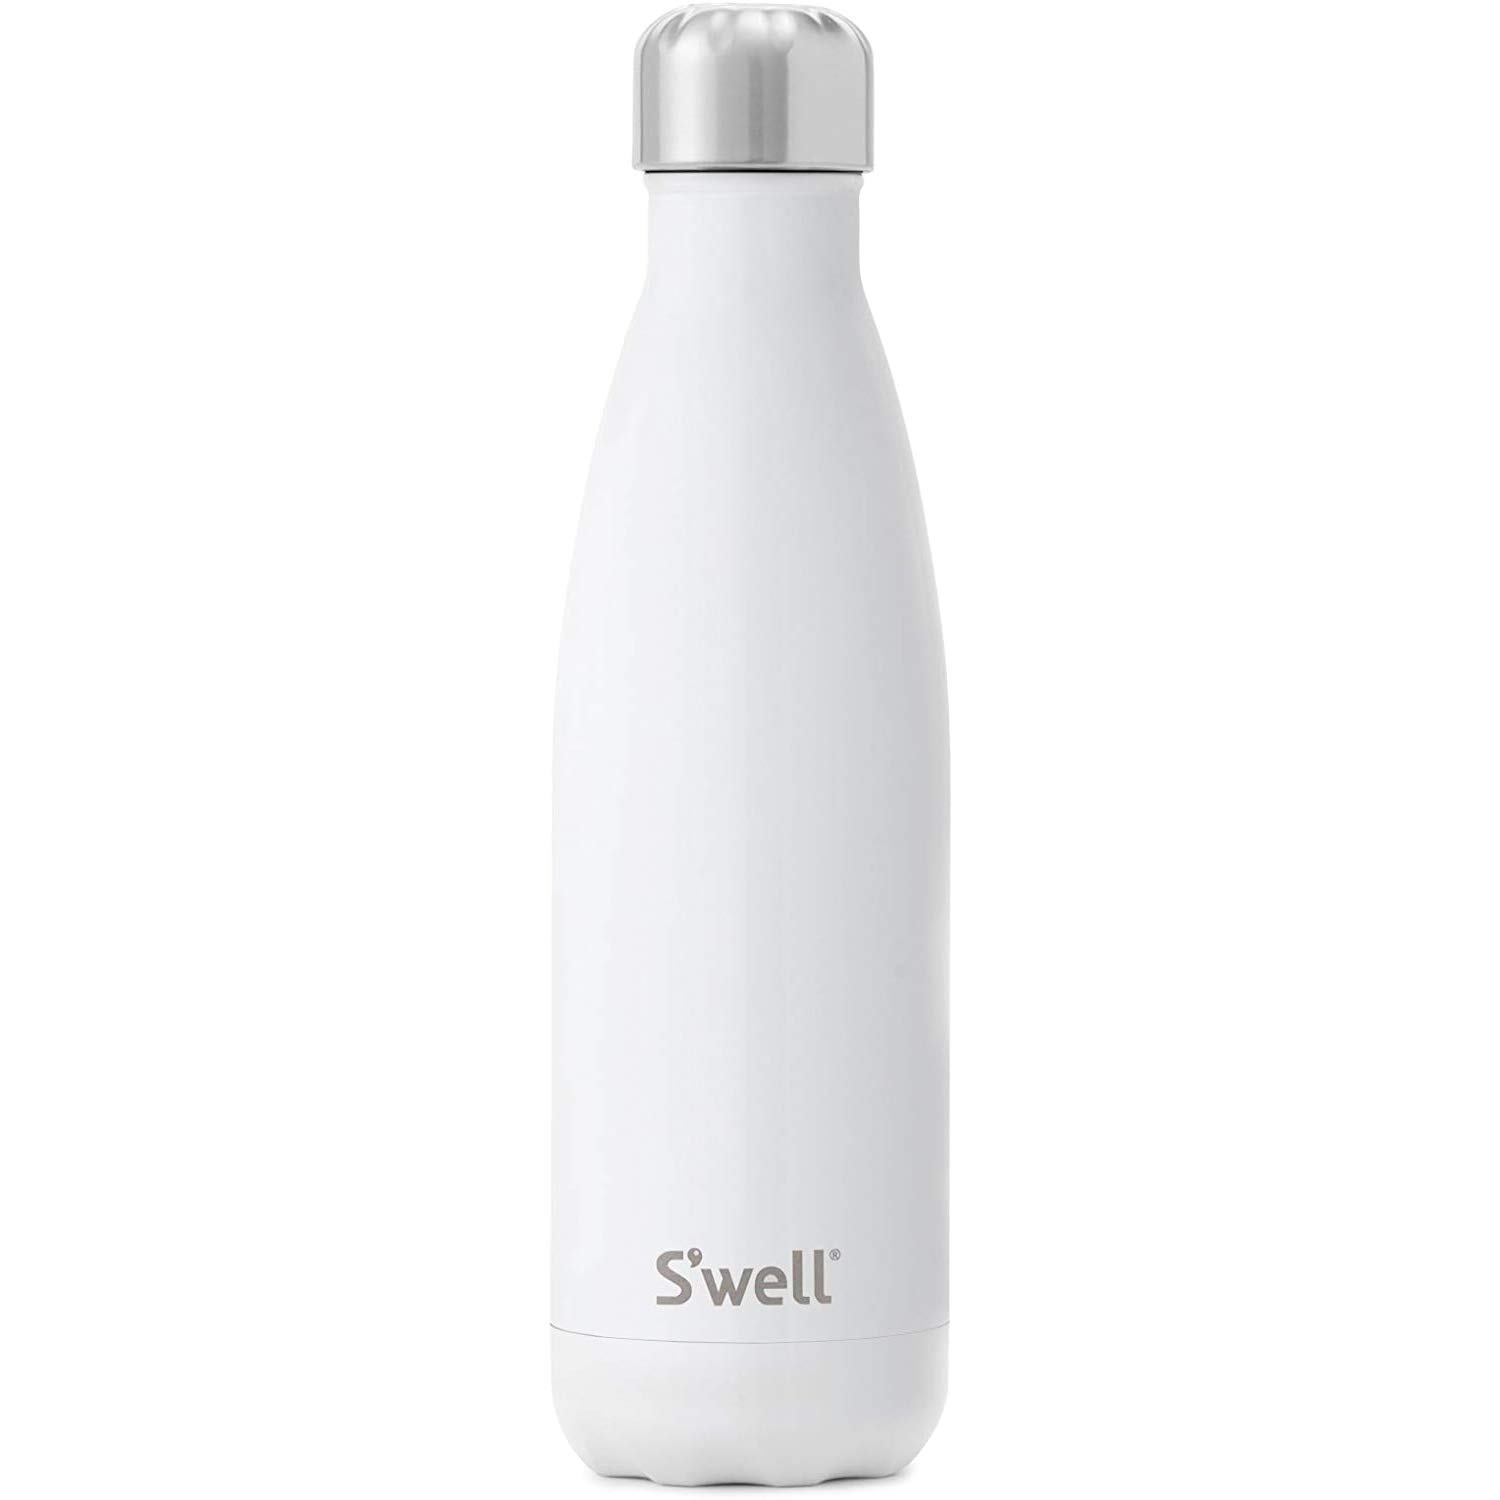 Where to Buy Swell Water Bottle